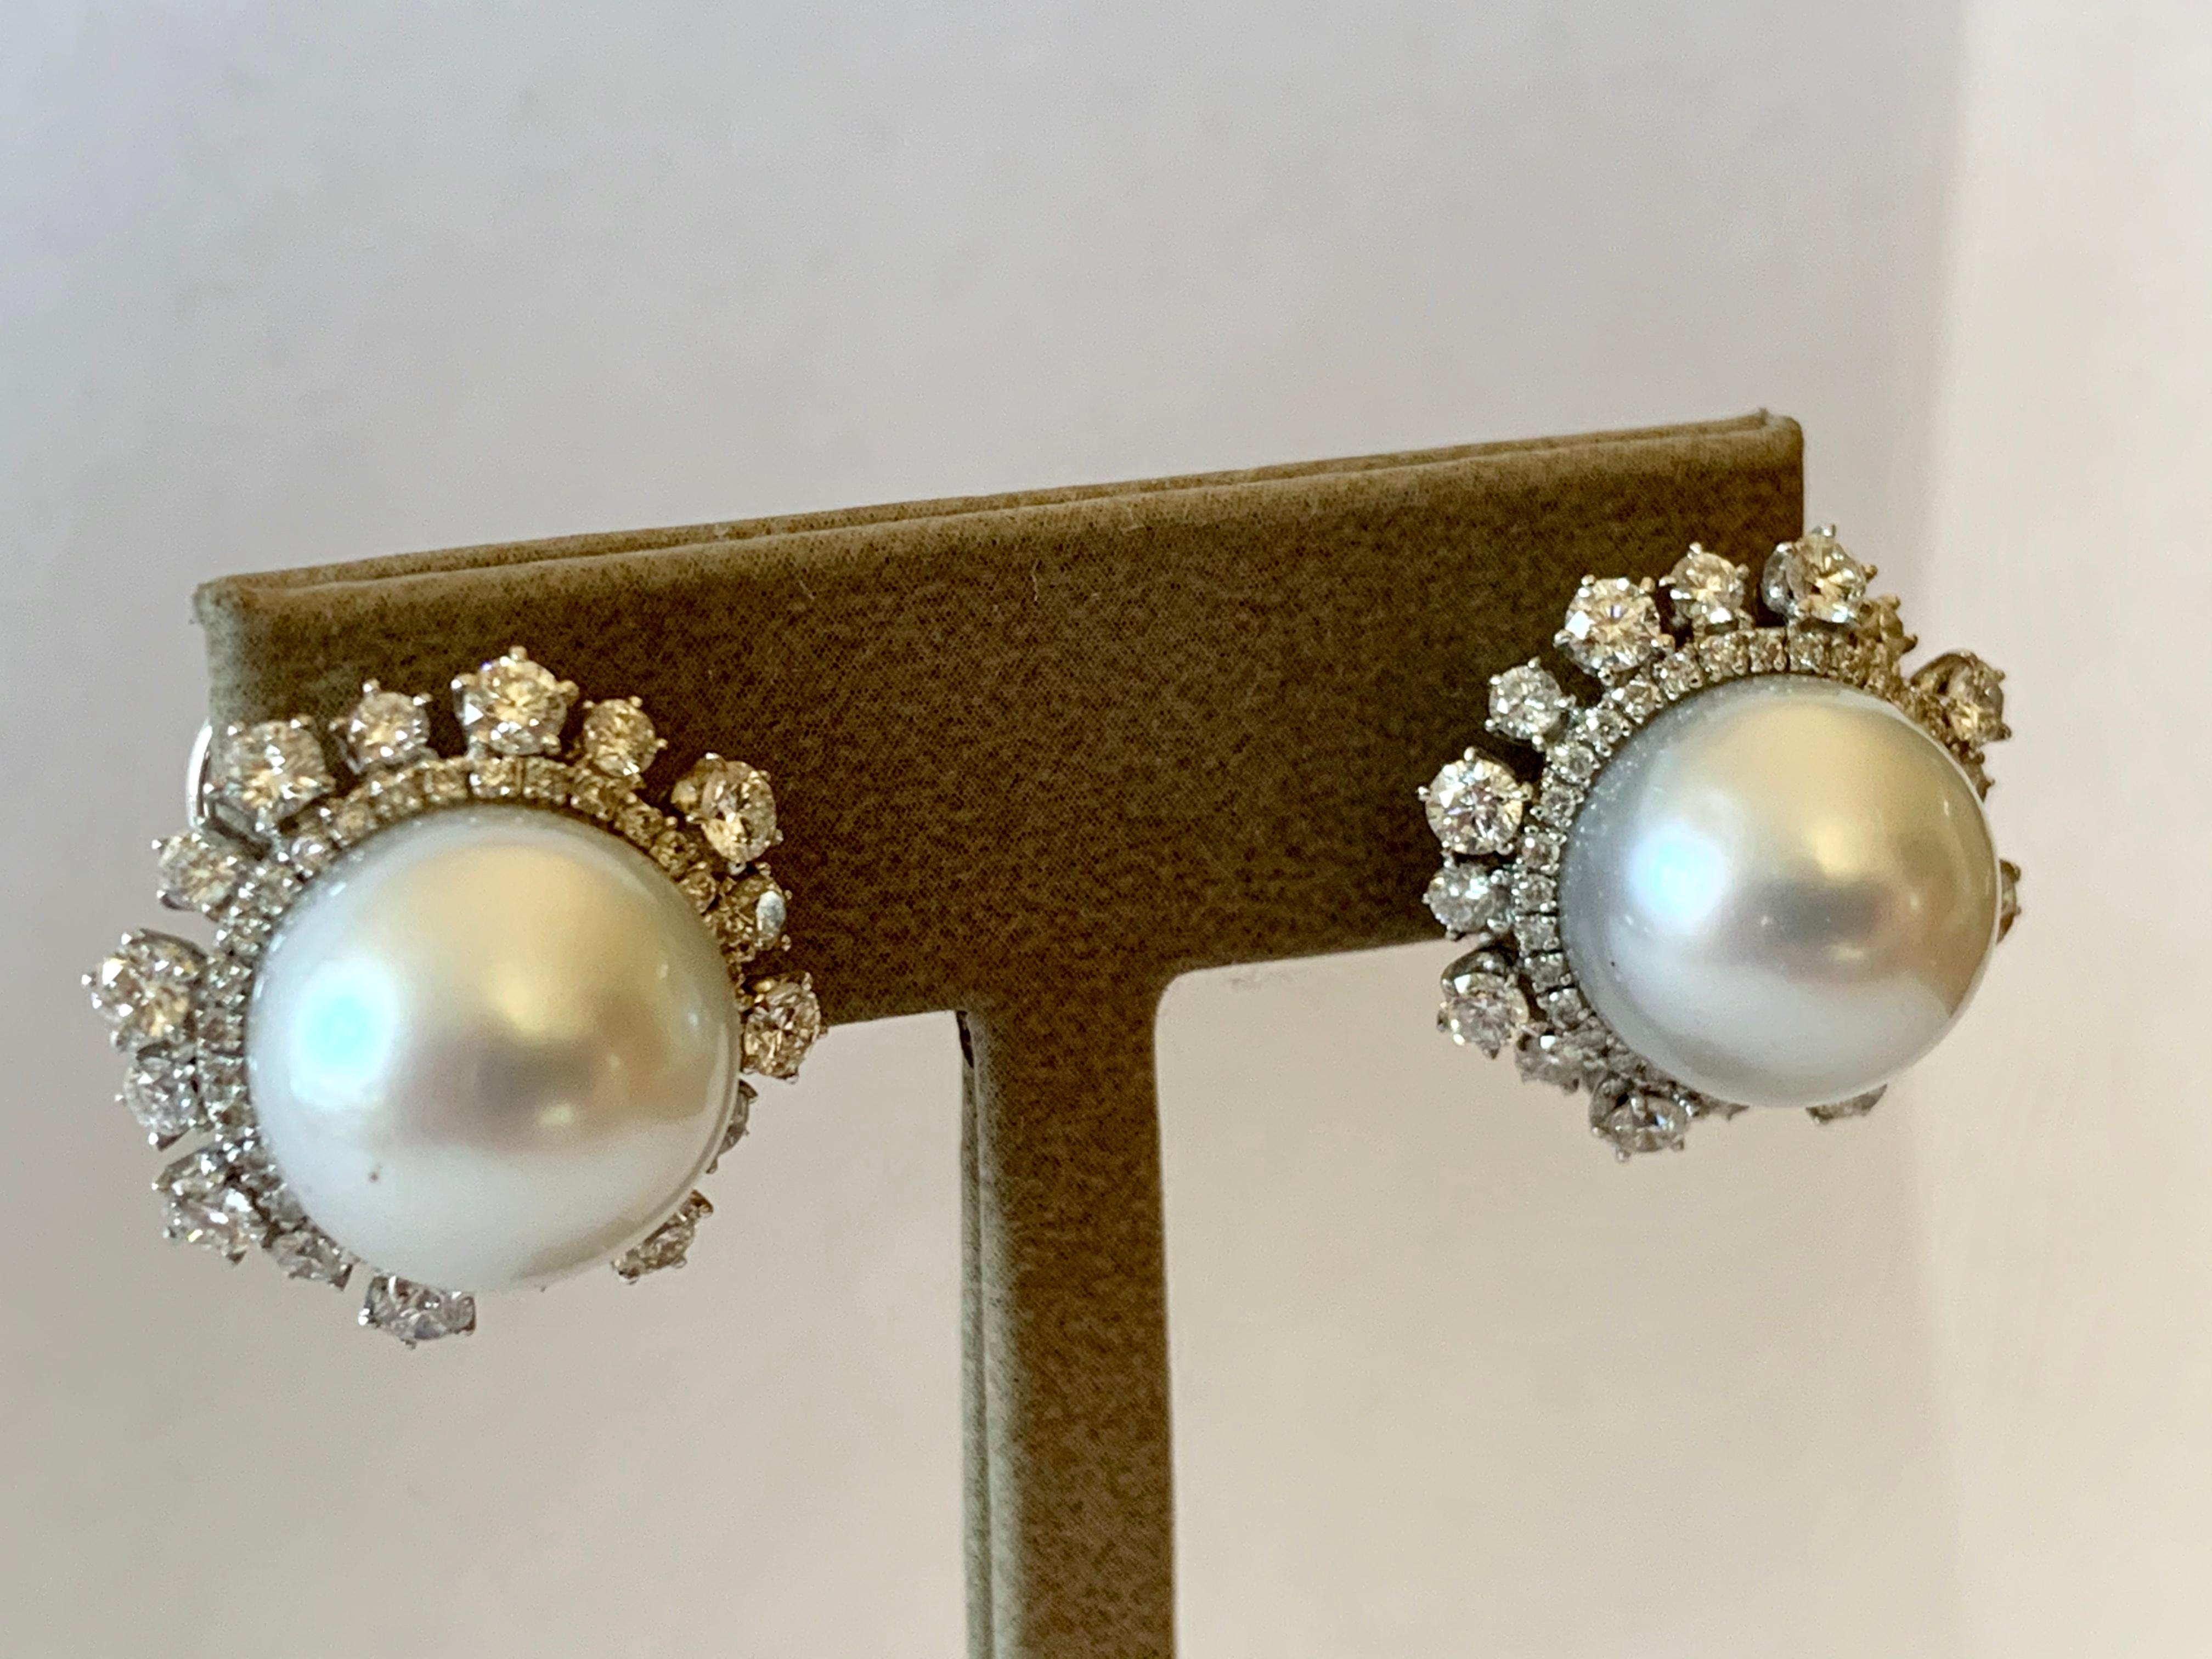 Contemporary Timeless and Elegant 18 Karat White Gold South Sea Pearl Diamond Earrings